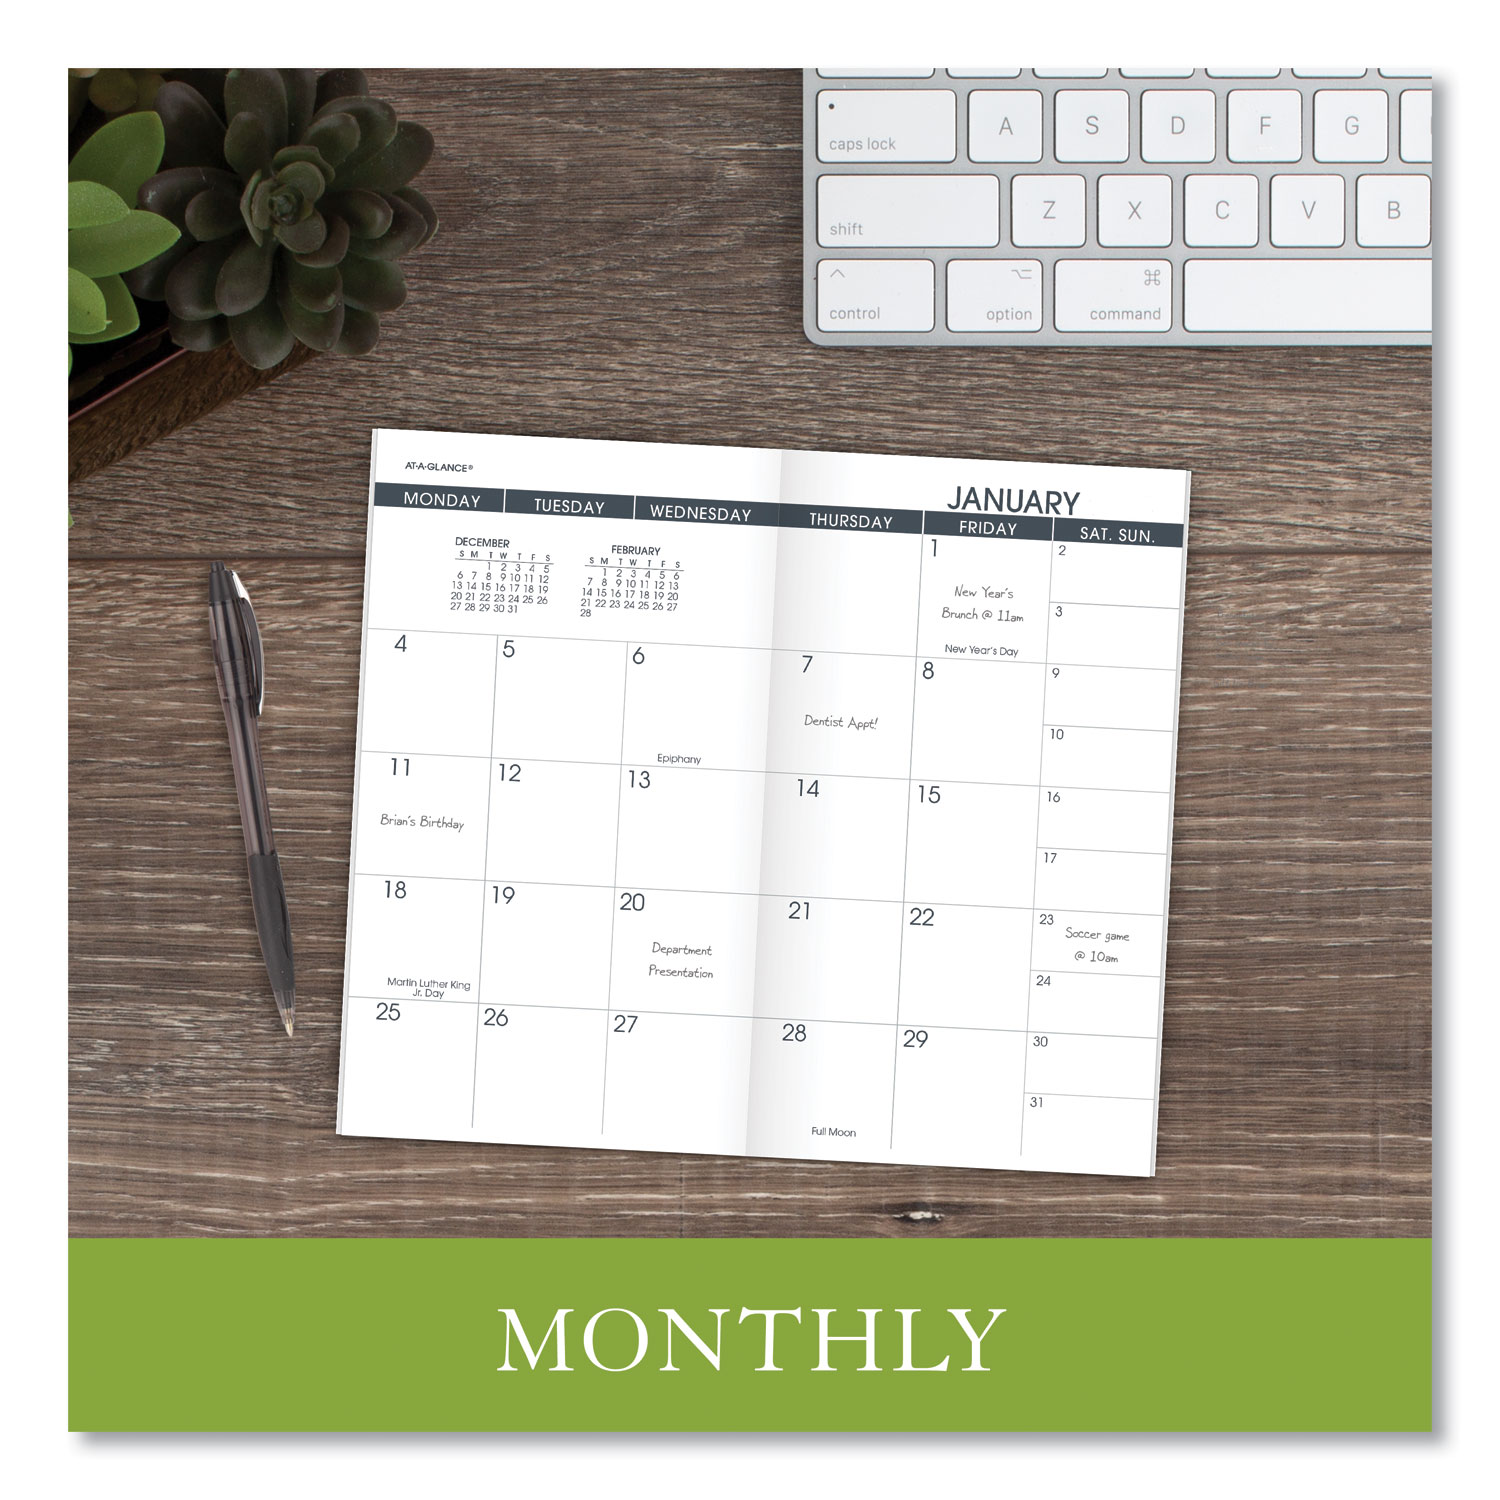 at-a-glance-pocket-size-monthly-planner-refill-6-x-3-5-white-sheets-13-month-jan-to-jan